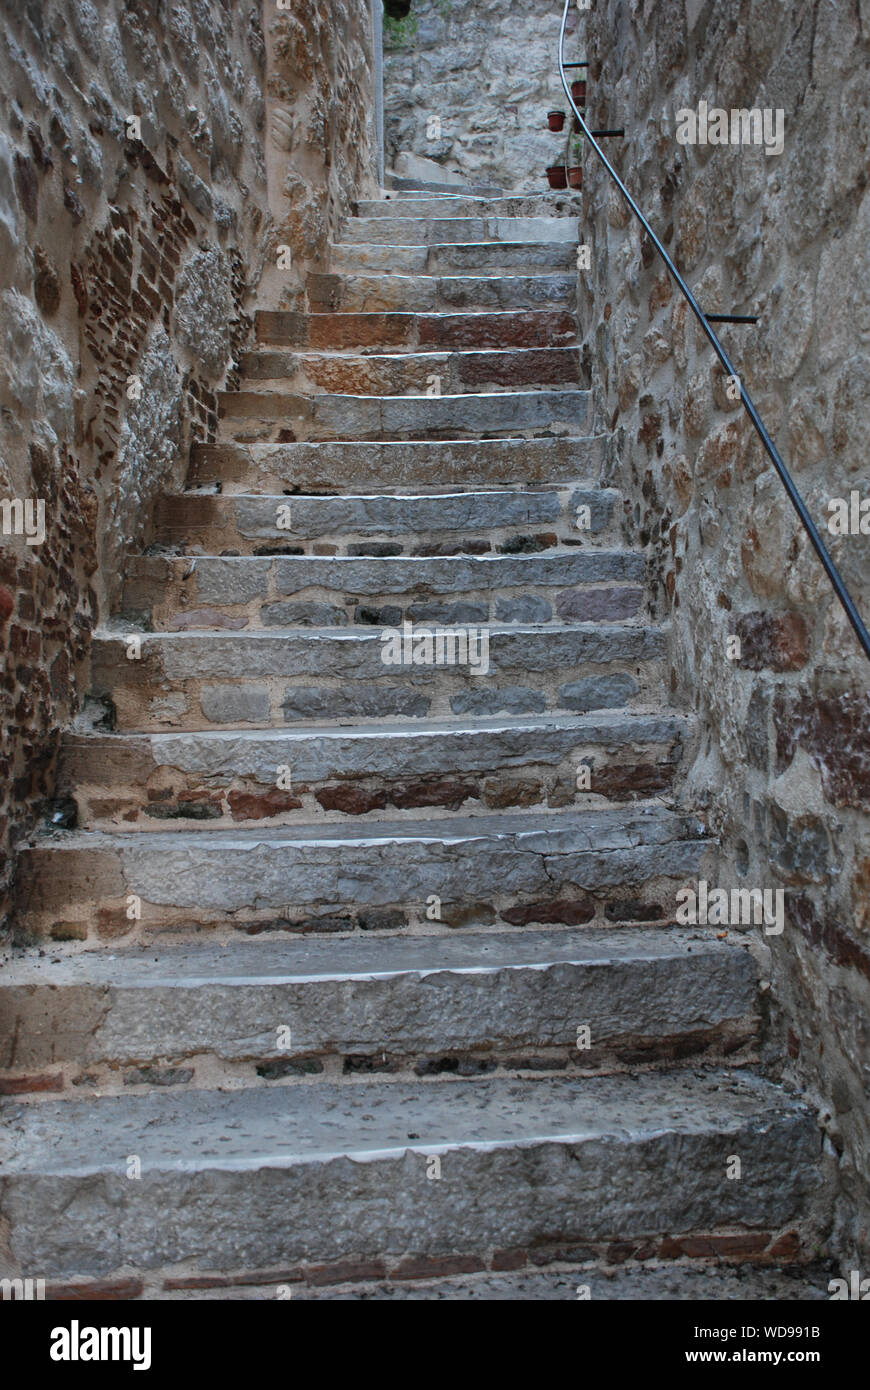 Stone steps and handrail Stock Photo